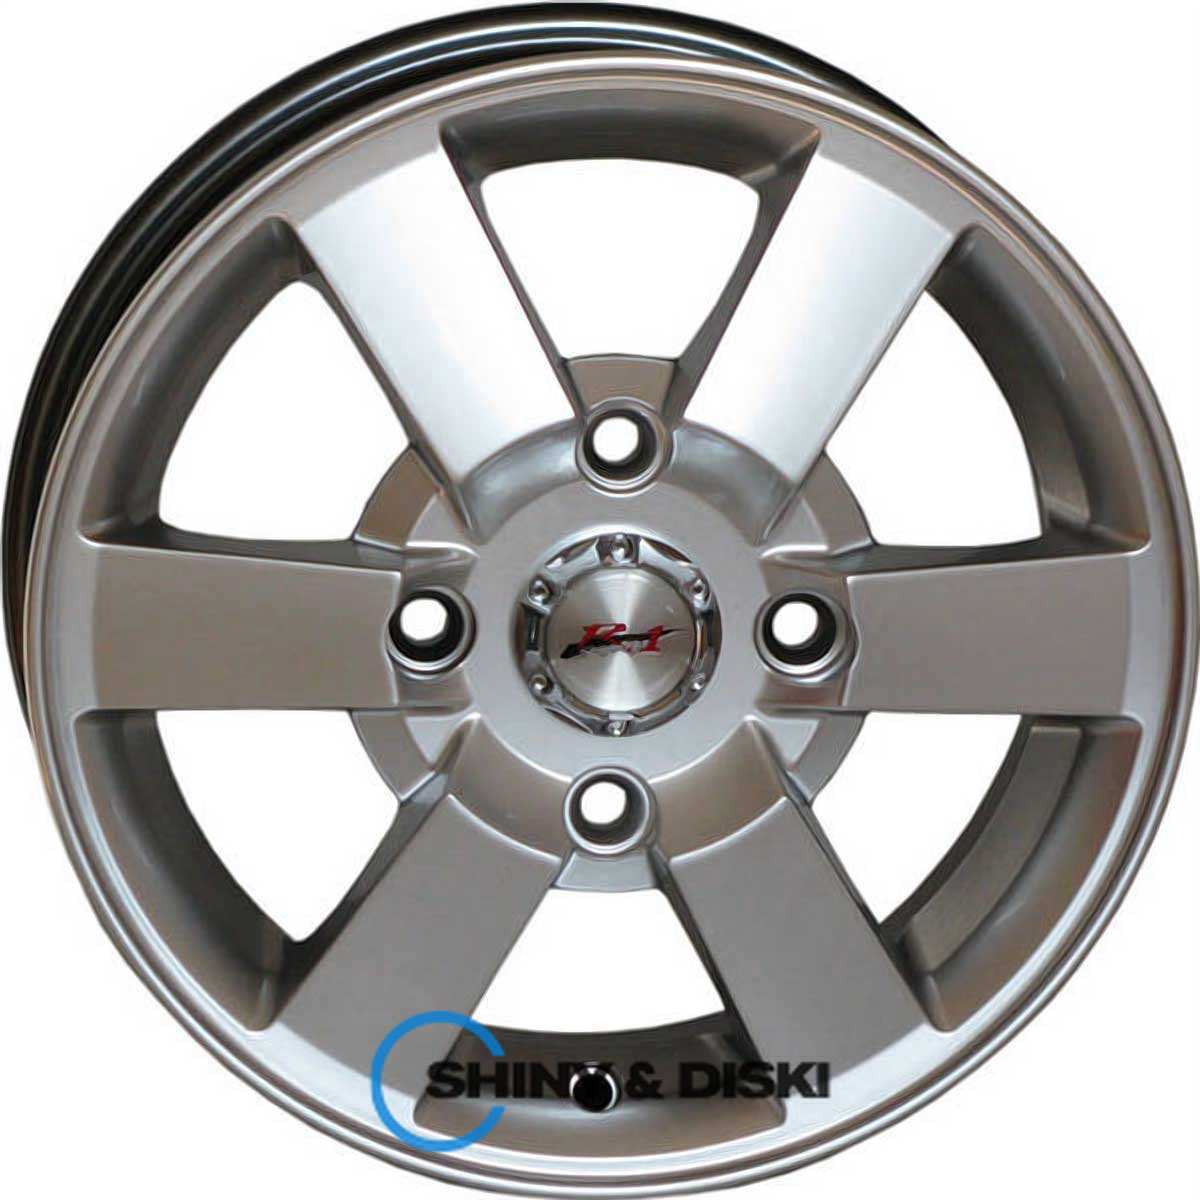 rs tuning 501 s r13 w4.5 pcd4x114.3 et44 dia69.1